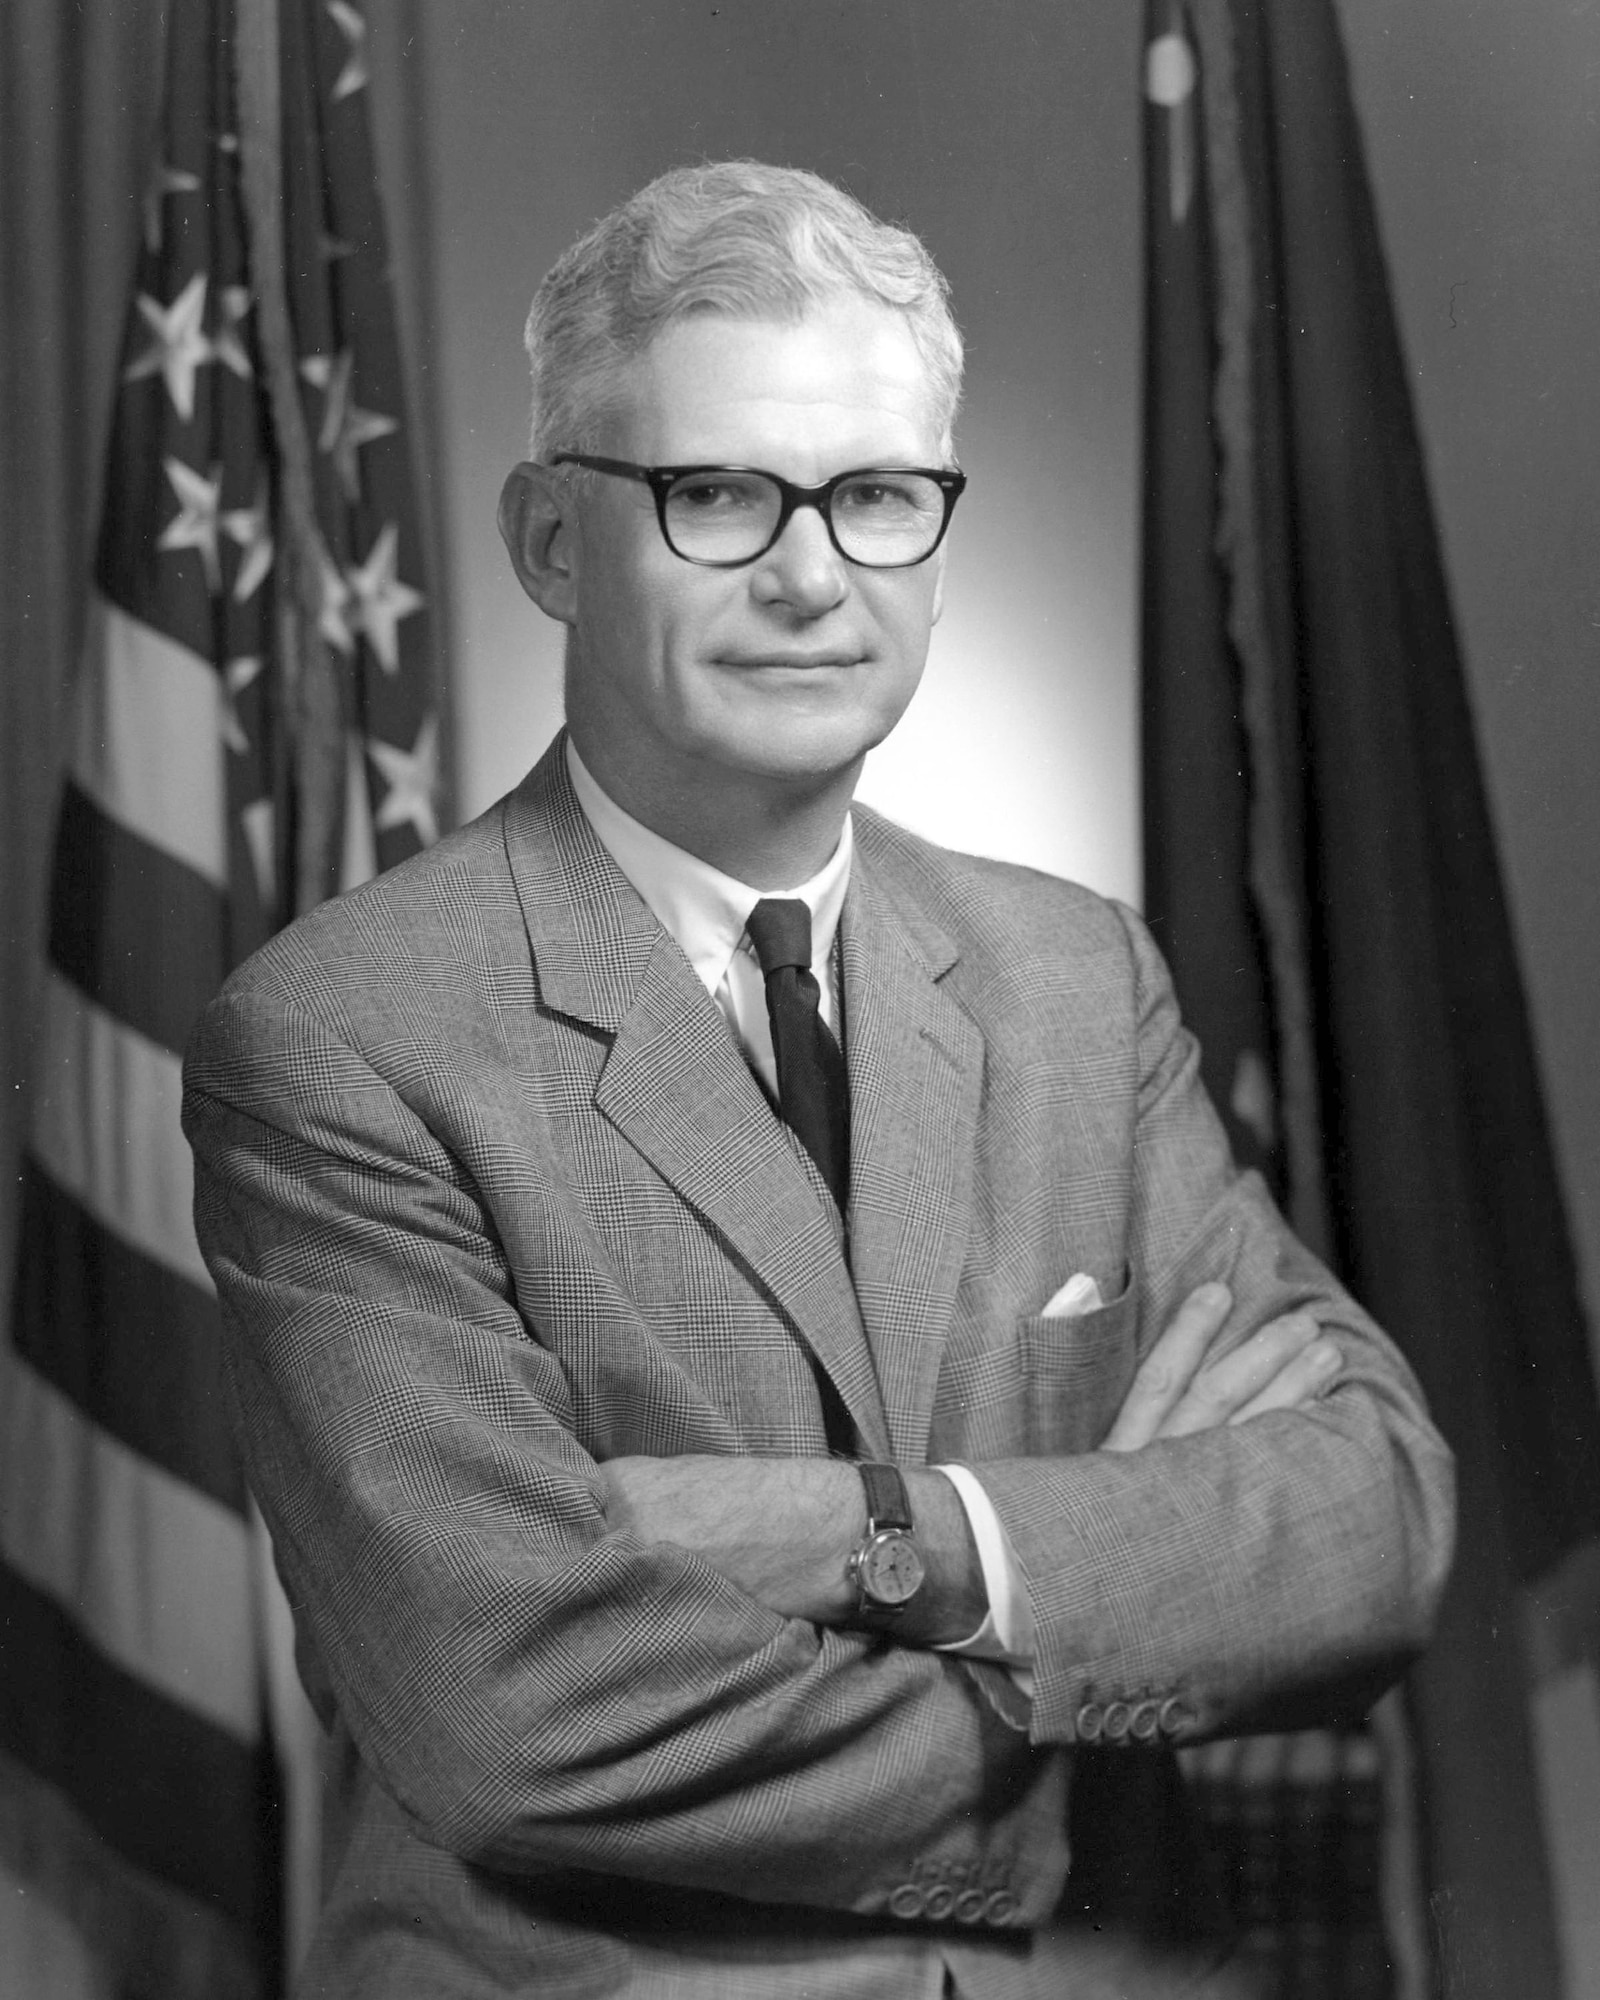 Former Secretary of the Air Force Dr. Robert C. Seamans Jr. died June 28 at his home in Beverly, Mass. He was the ninth secretary of the Air Force. (U.S. Air Force photo) 